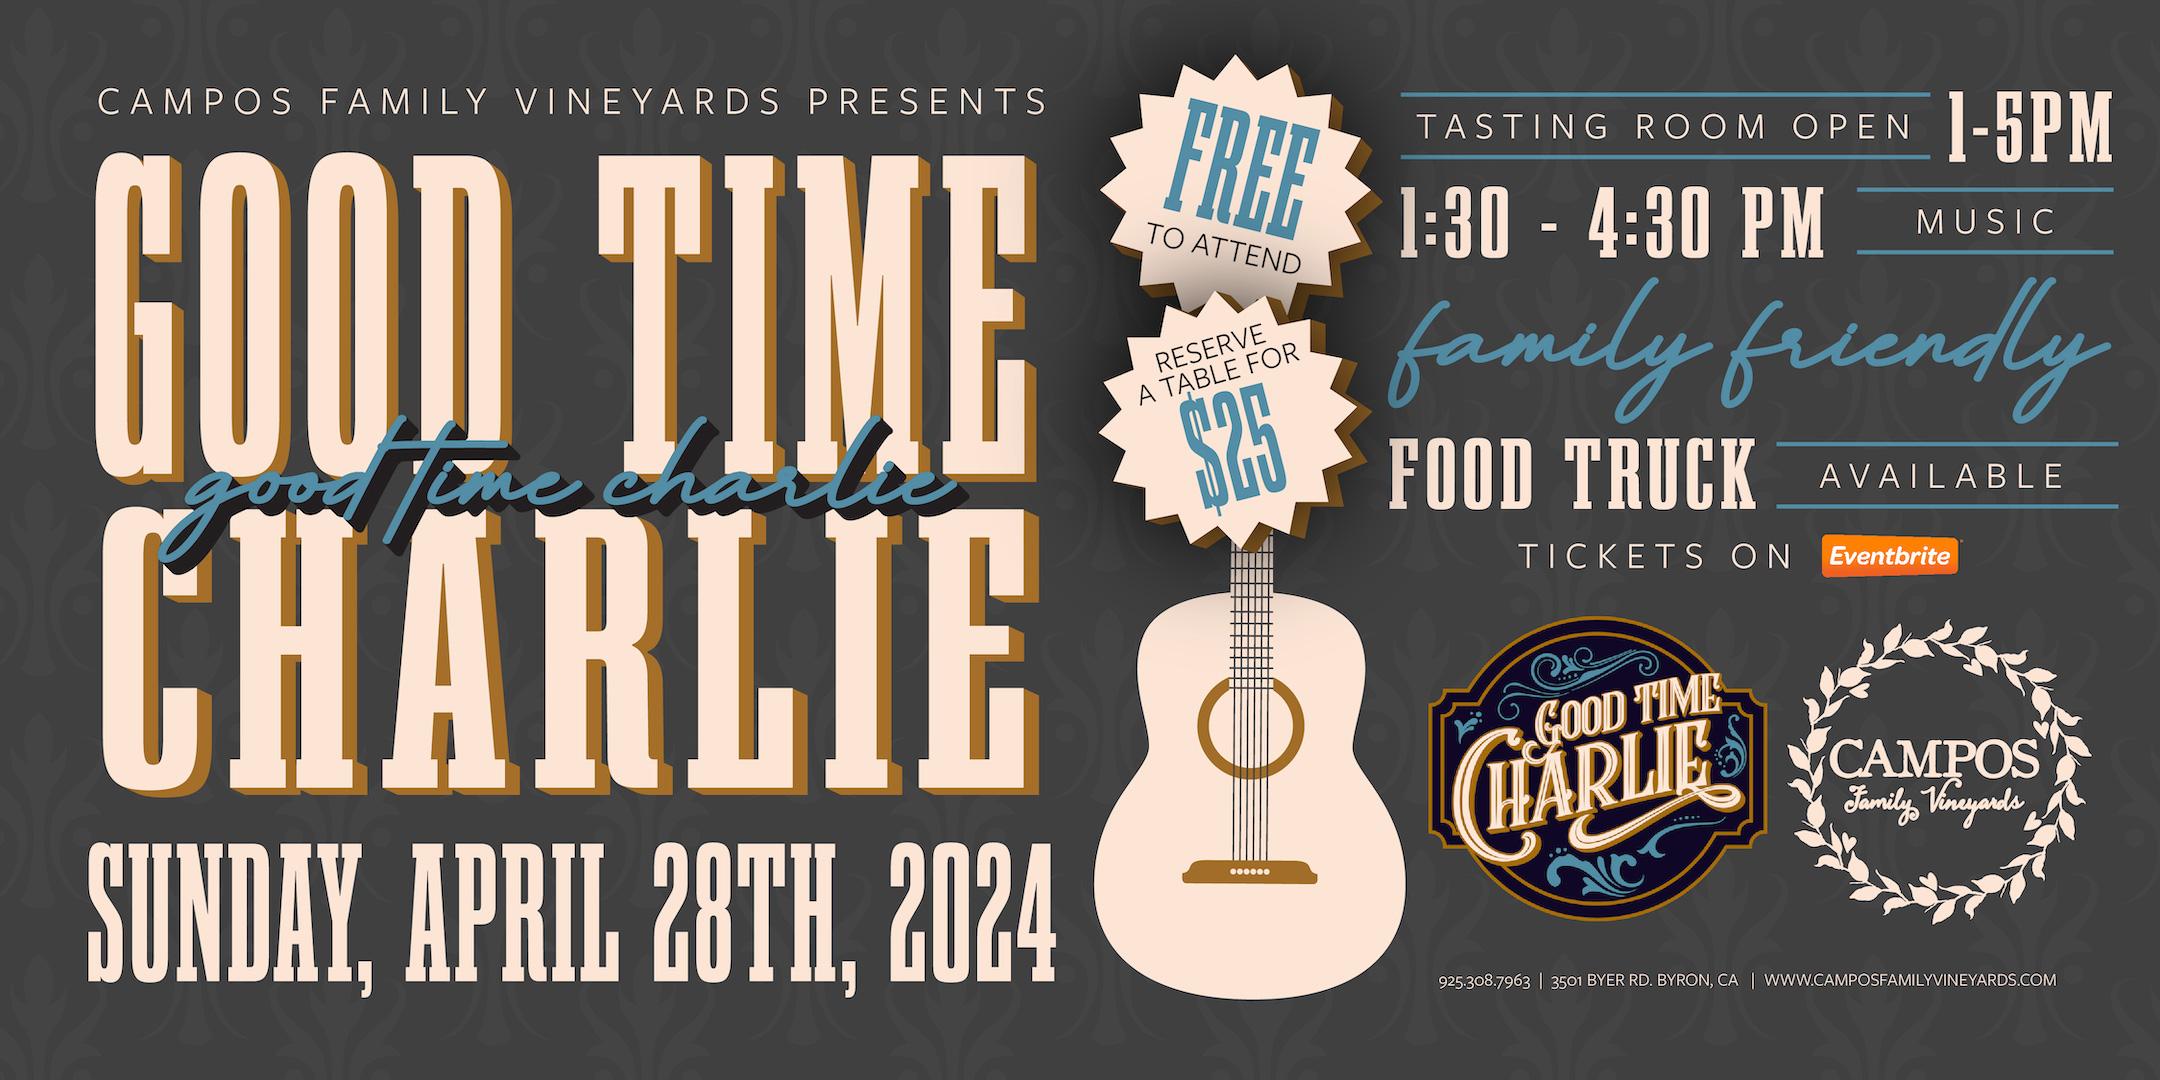 LIVE MUSIC with Good Time Charlie